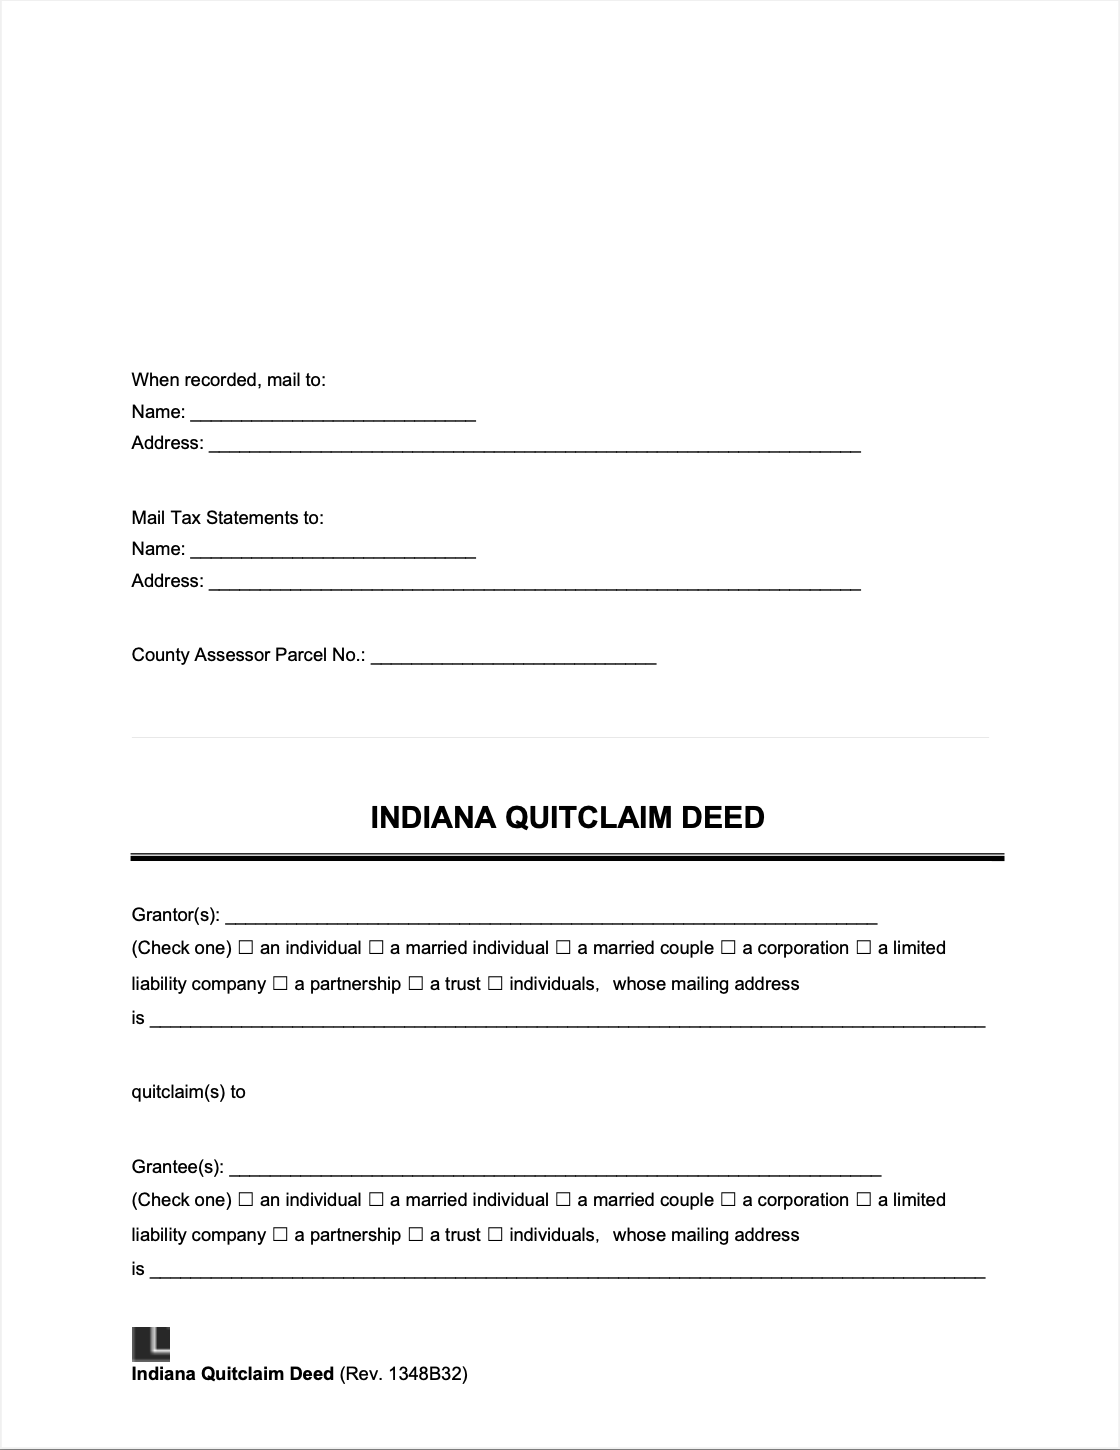 Indiana Quitclaim Deed | Form & How to Write Guide